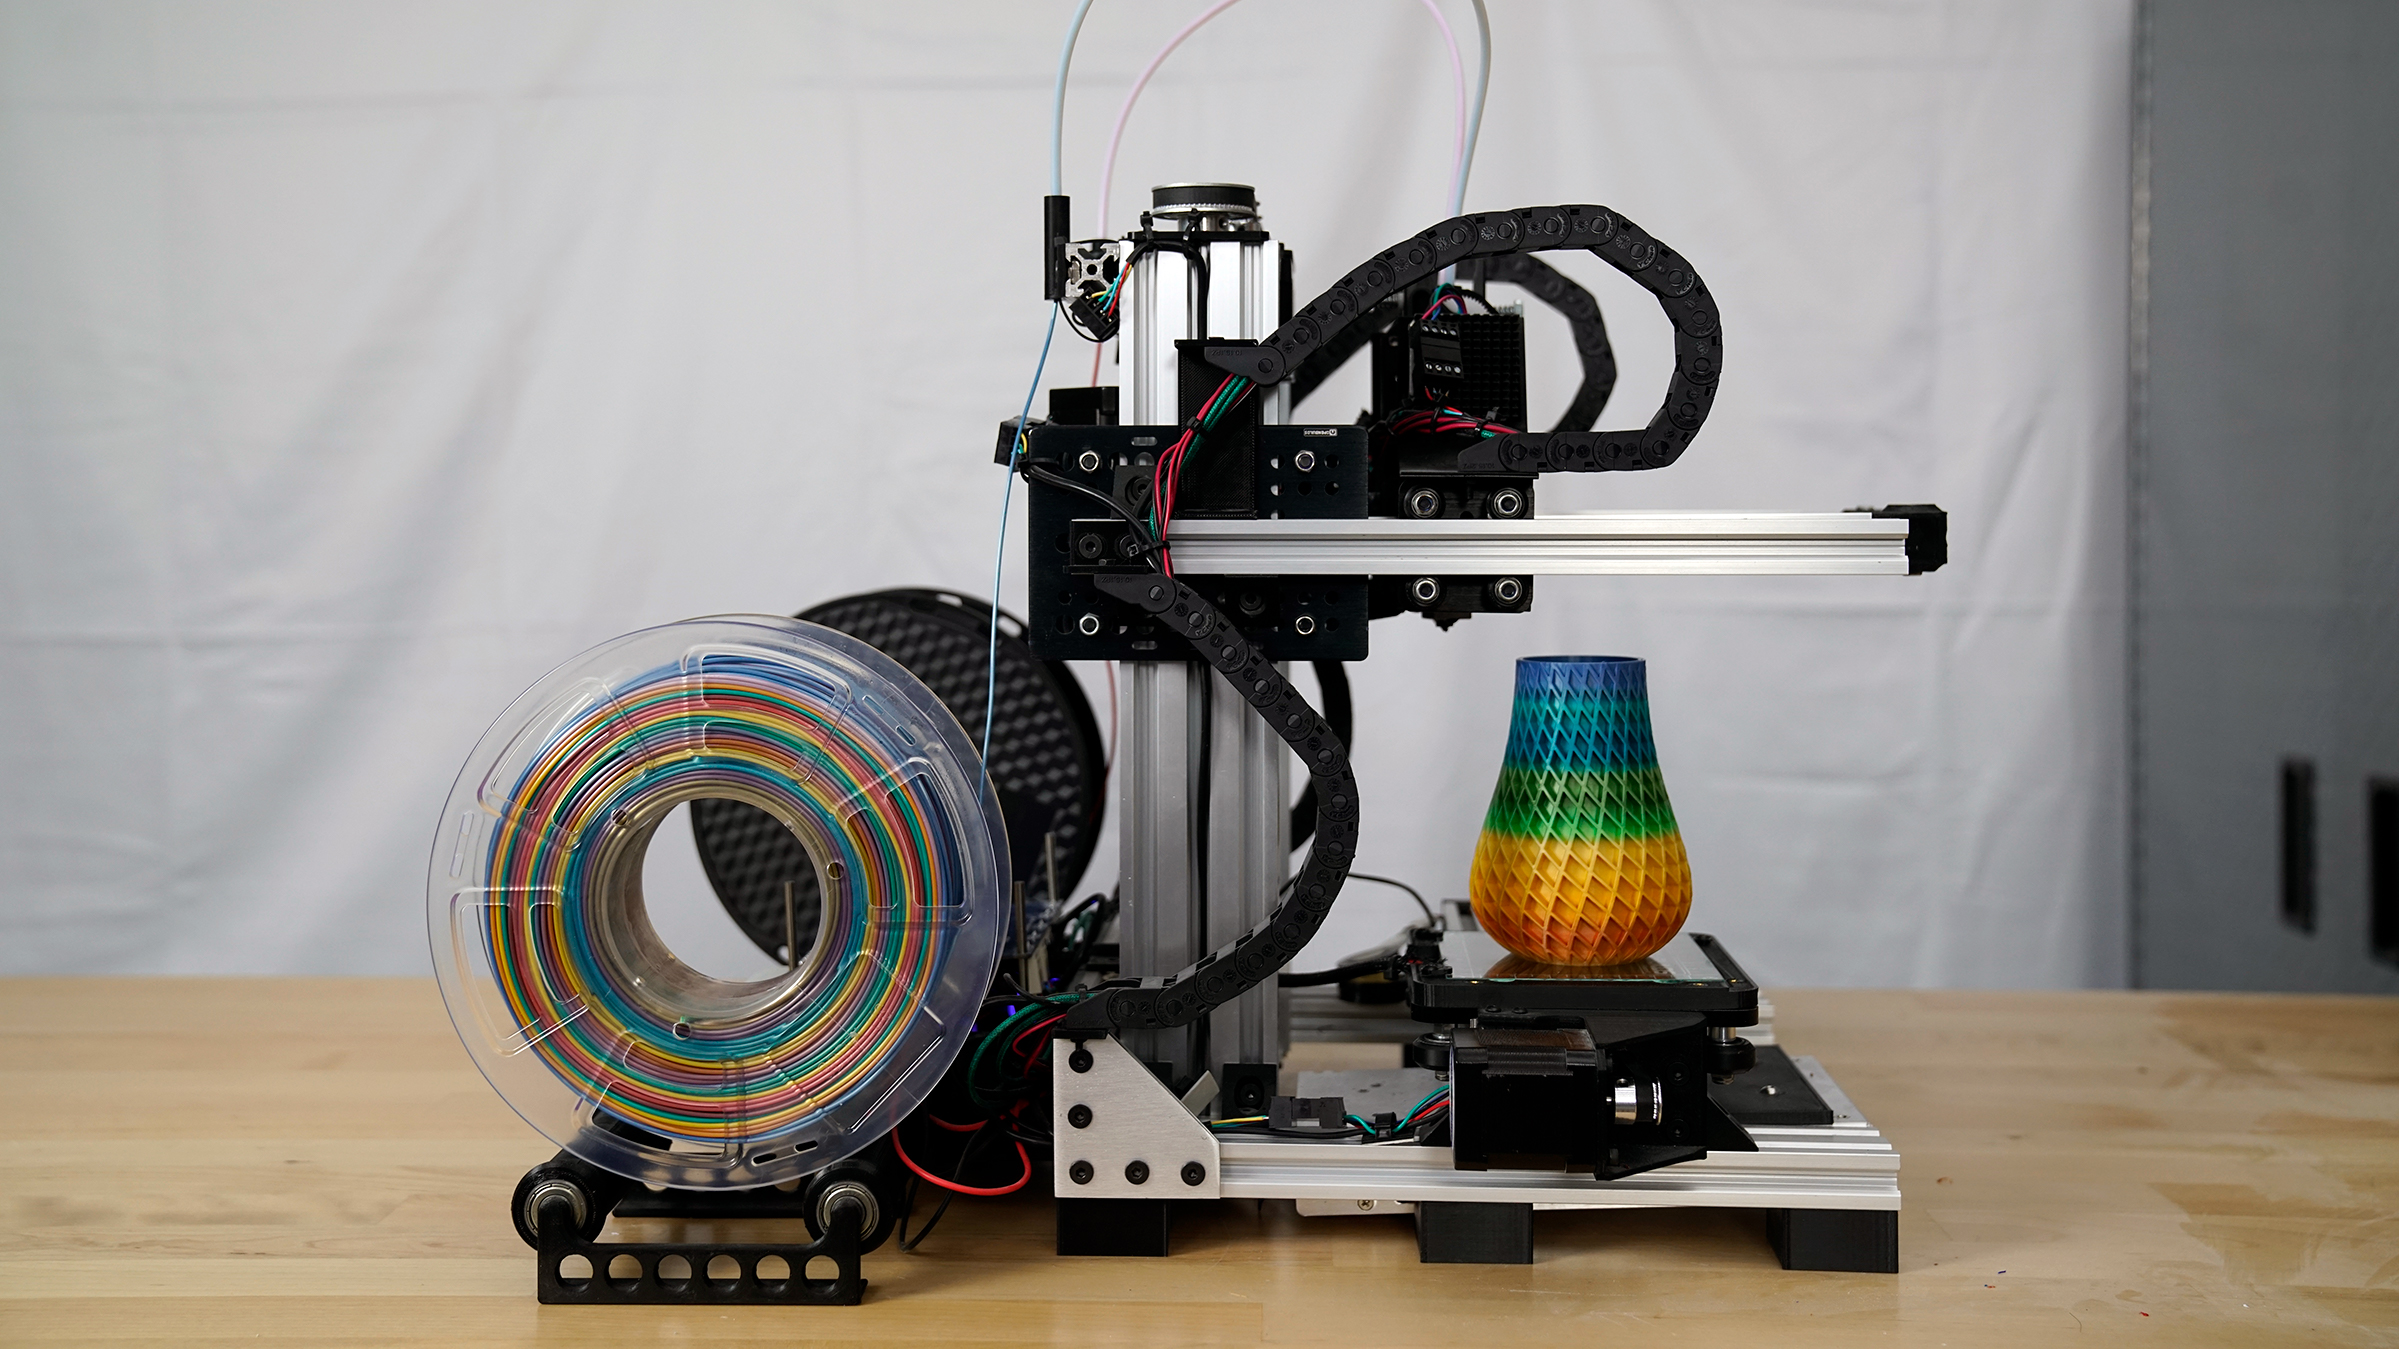 How to Build 3D Printer